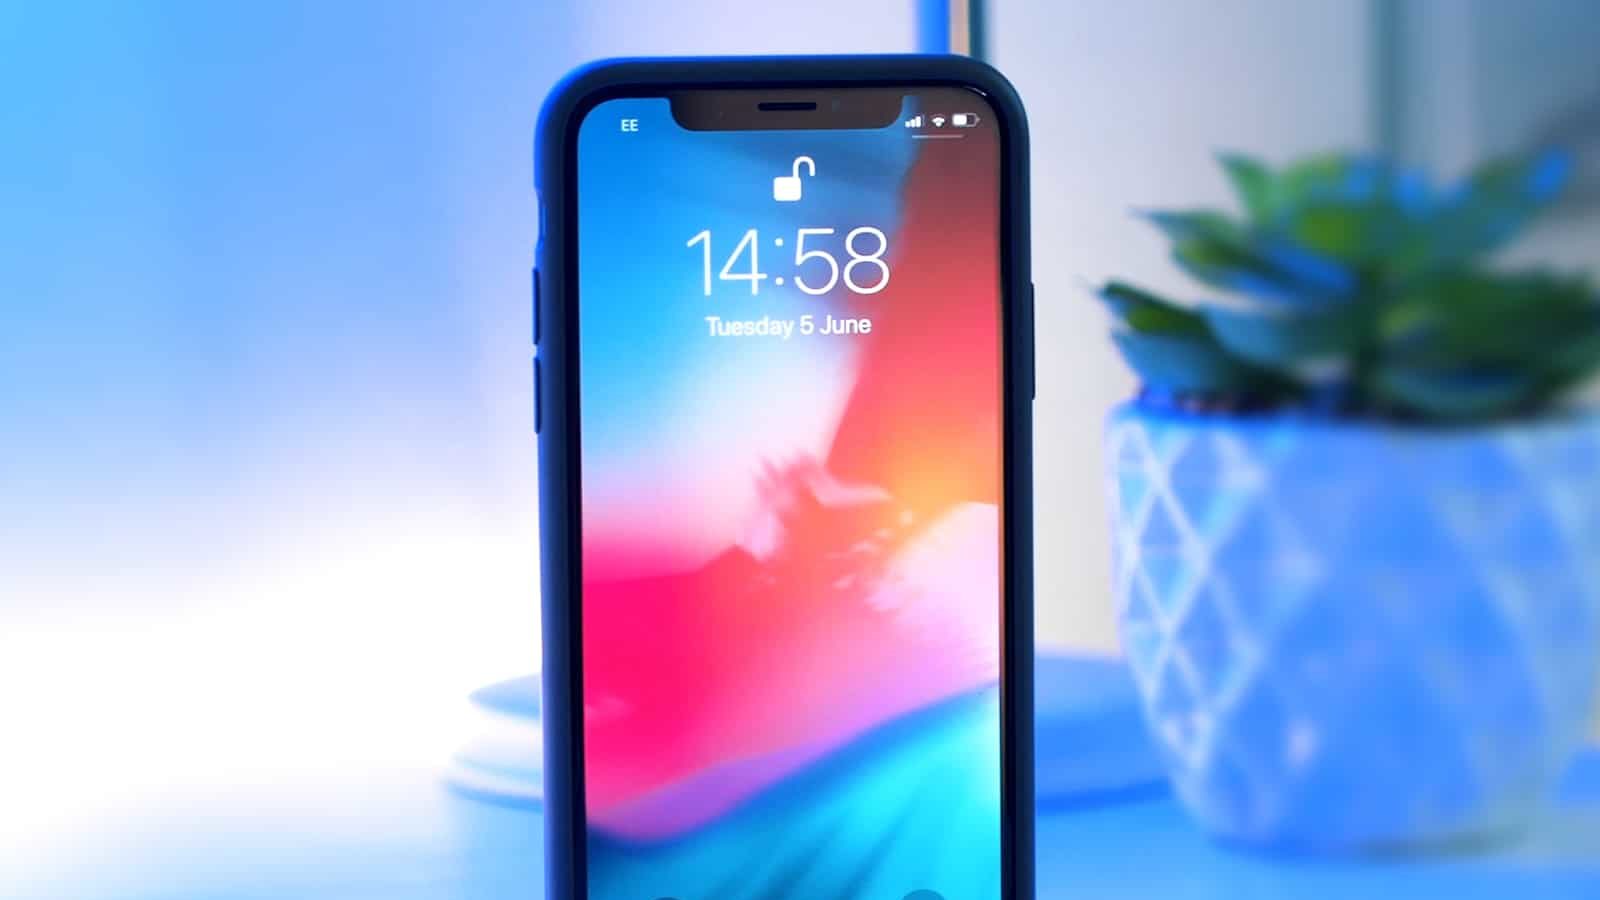 Apple Iphone 12 Design Leaks No Display Notch And Four Lens Rear Camera Rumors Could Be Fake